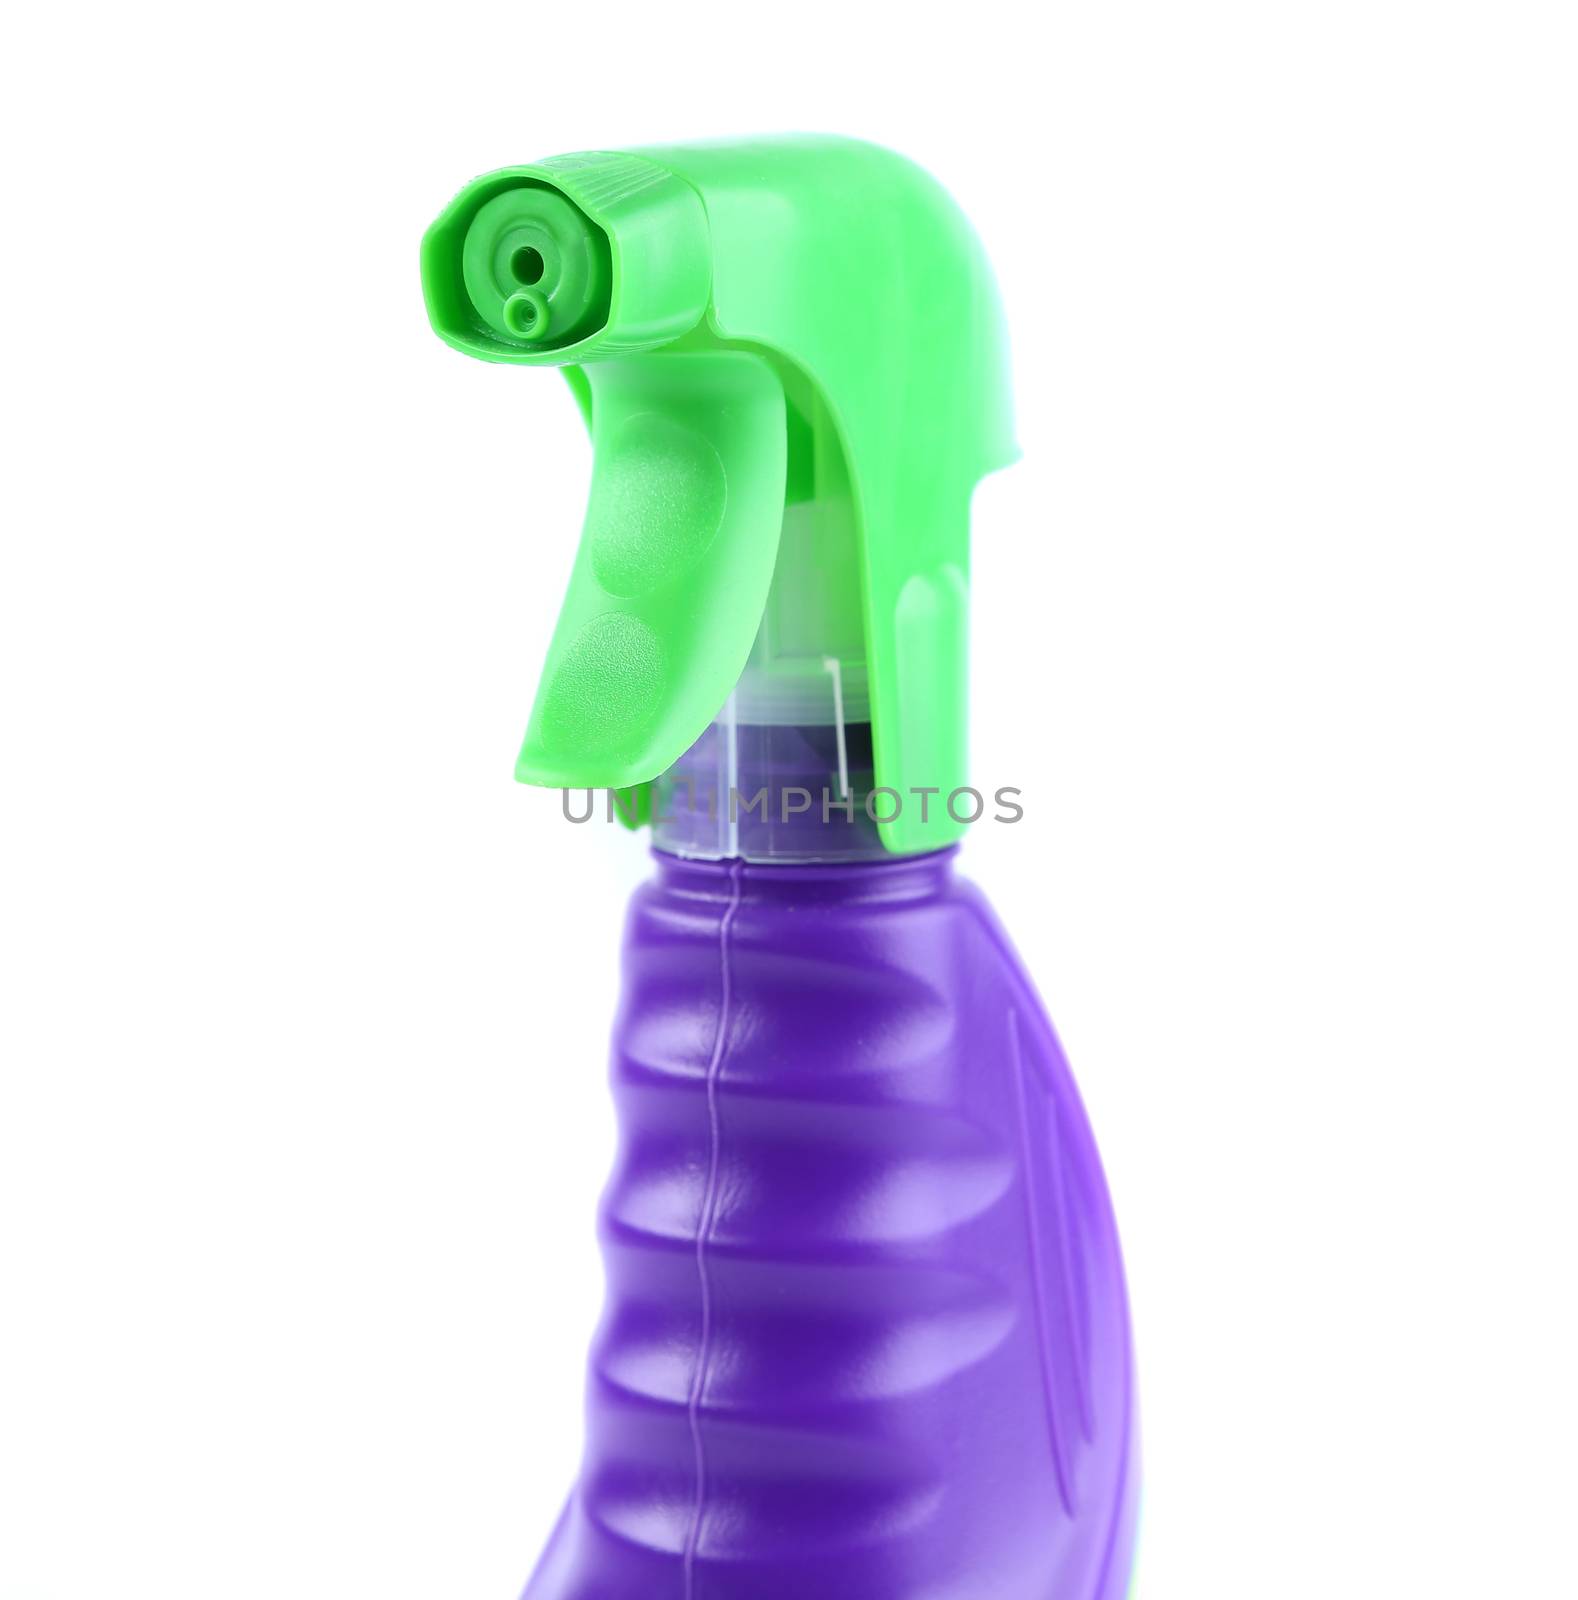 Spray from a bottle of cleaner by indigolotos